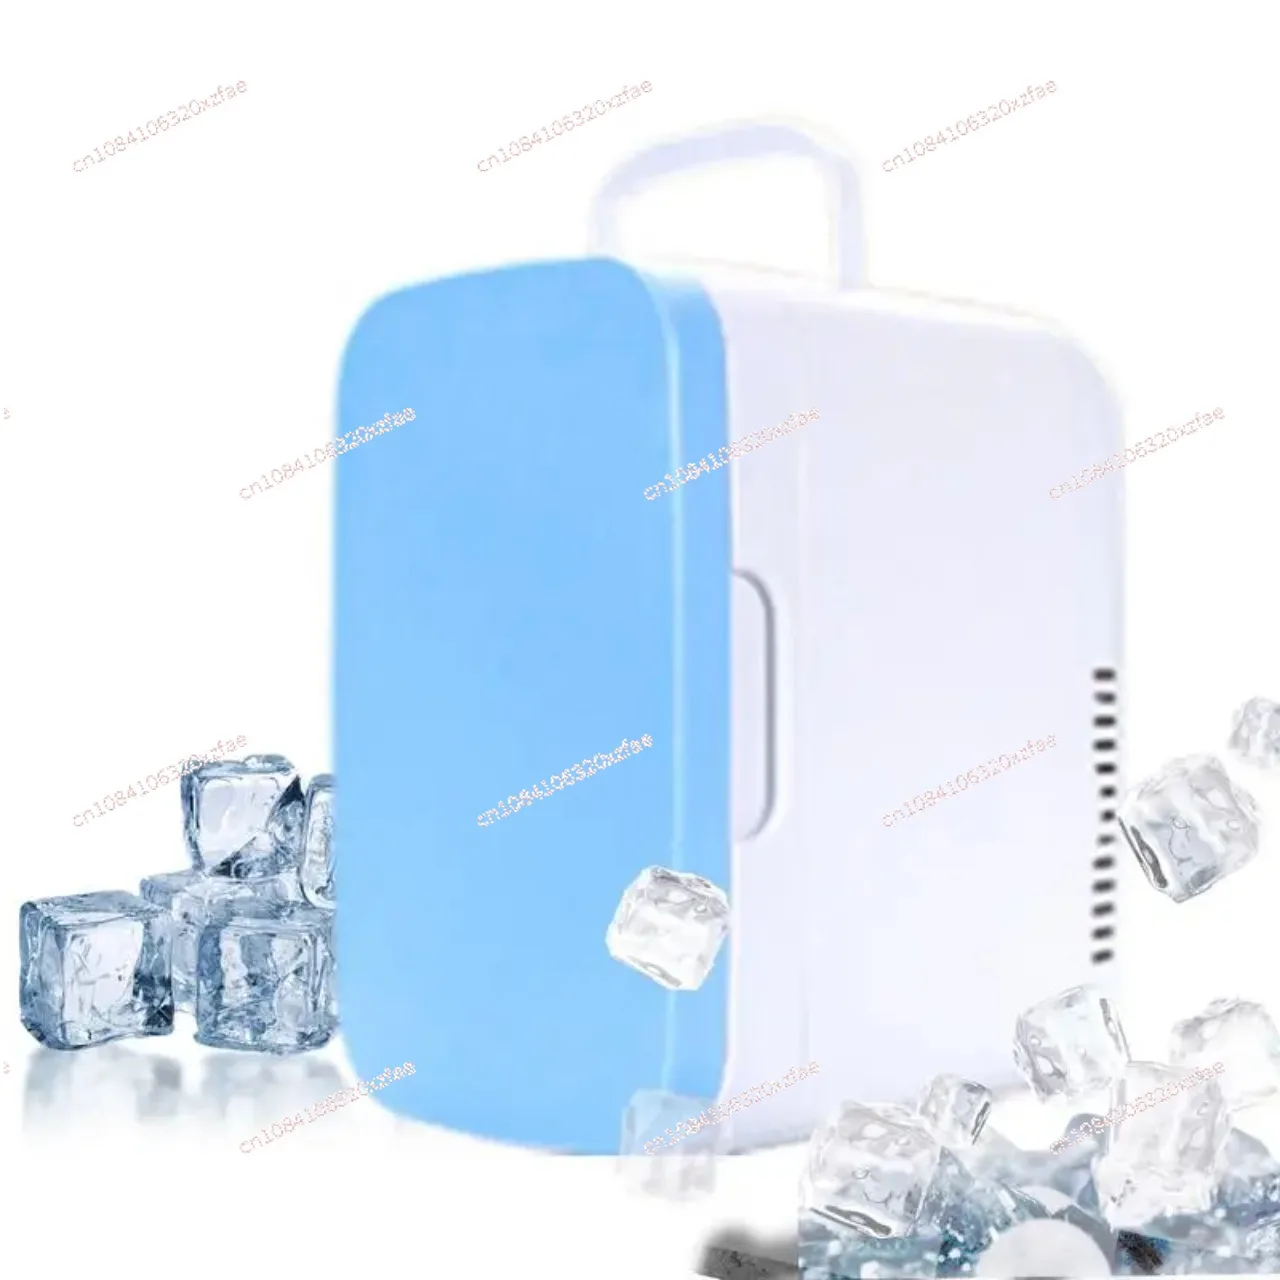 

For Car Travel Truck Kitchen Home Use Cooler and Warmer 8L Portable Mini Refrigerator Electric Cooler Compact Refrigerator 12V